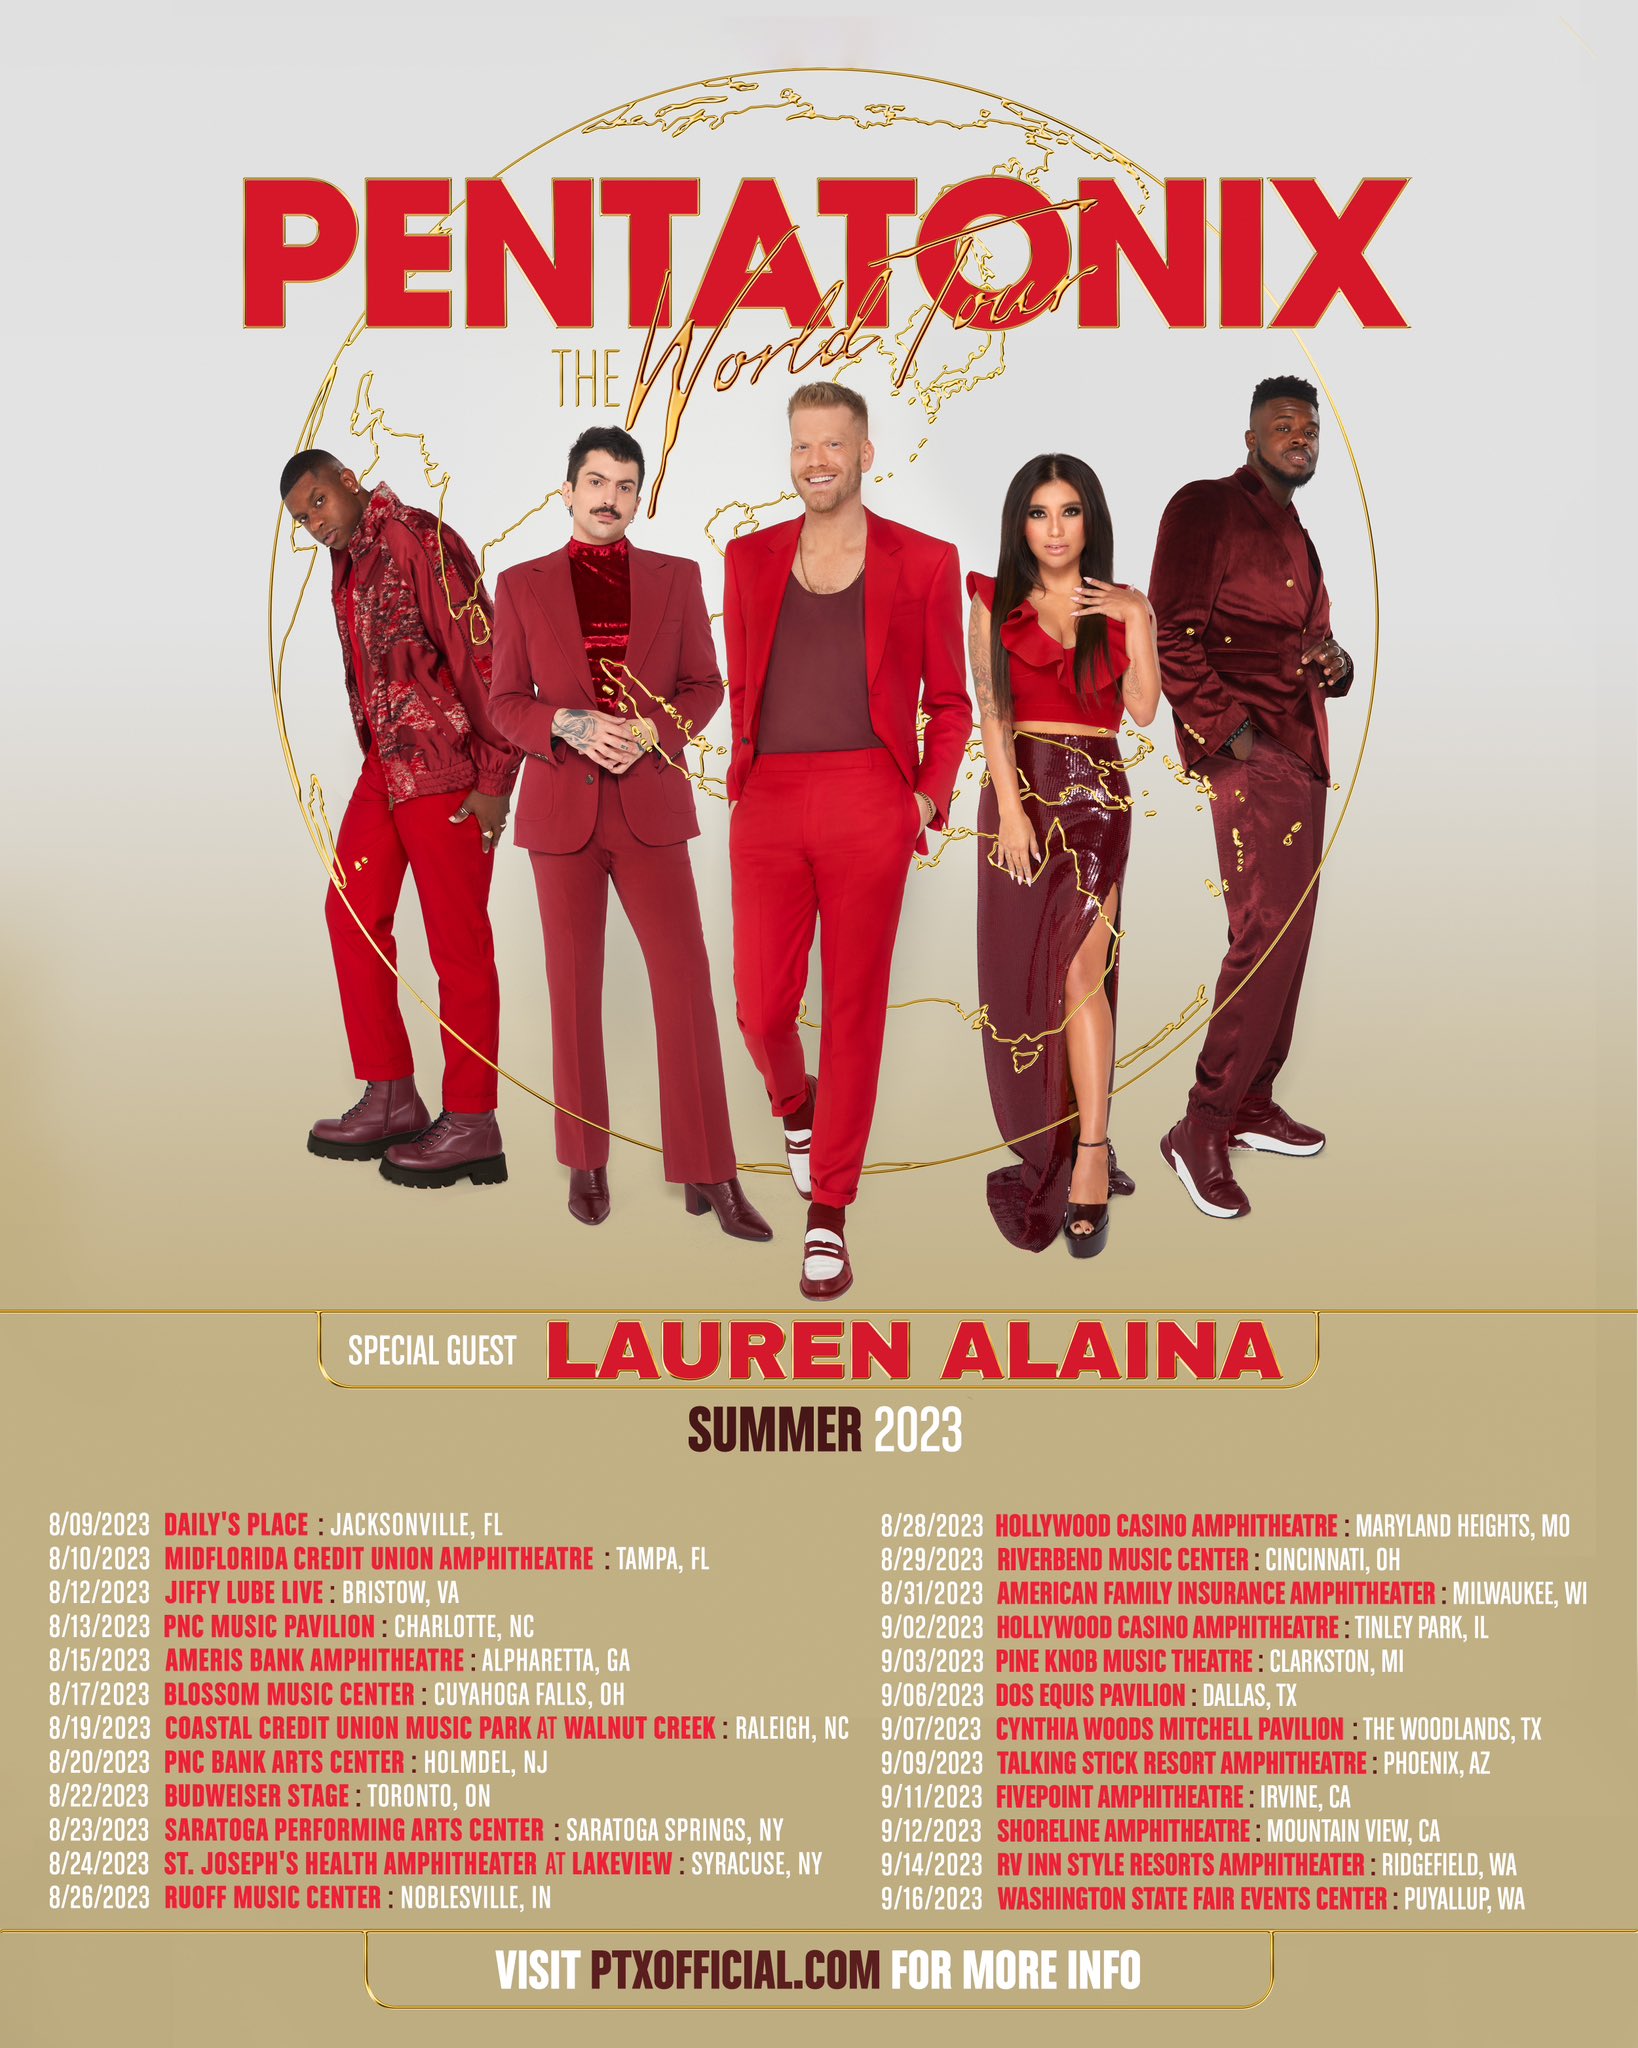 Pentatonix on Twitter: "Who's ready to purchase tickets for our Summer 2023  tour?! ☀️🎶 If you're on the East coast, tickets are ON SALE NOW! All other  timezones will go on sale